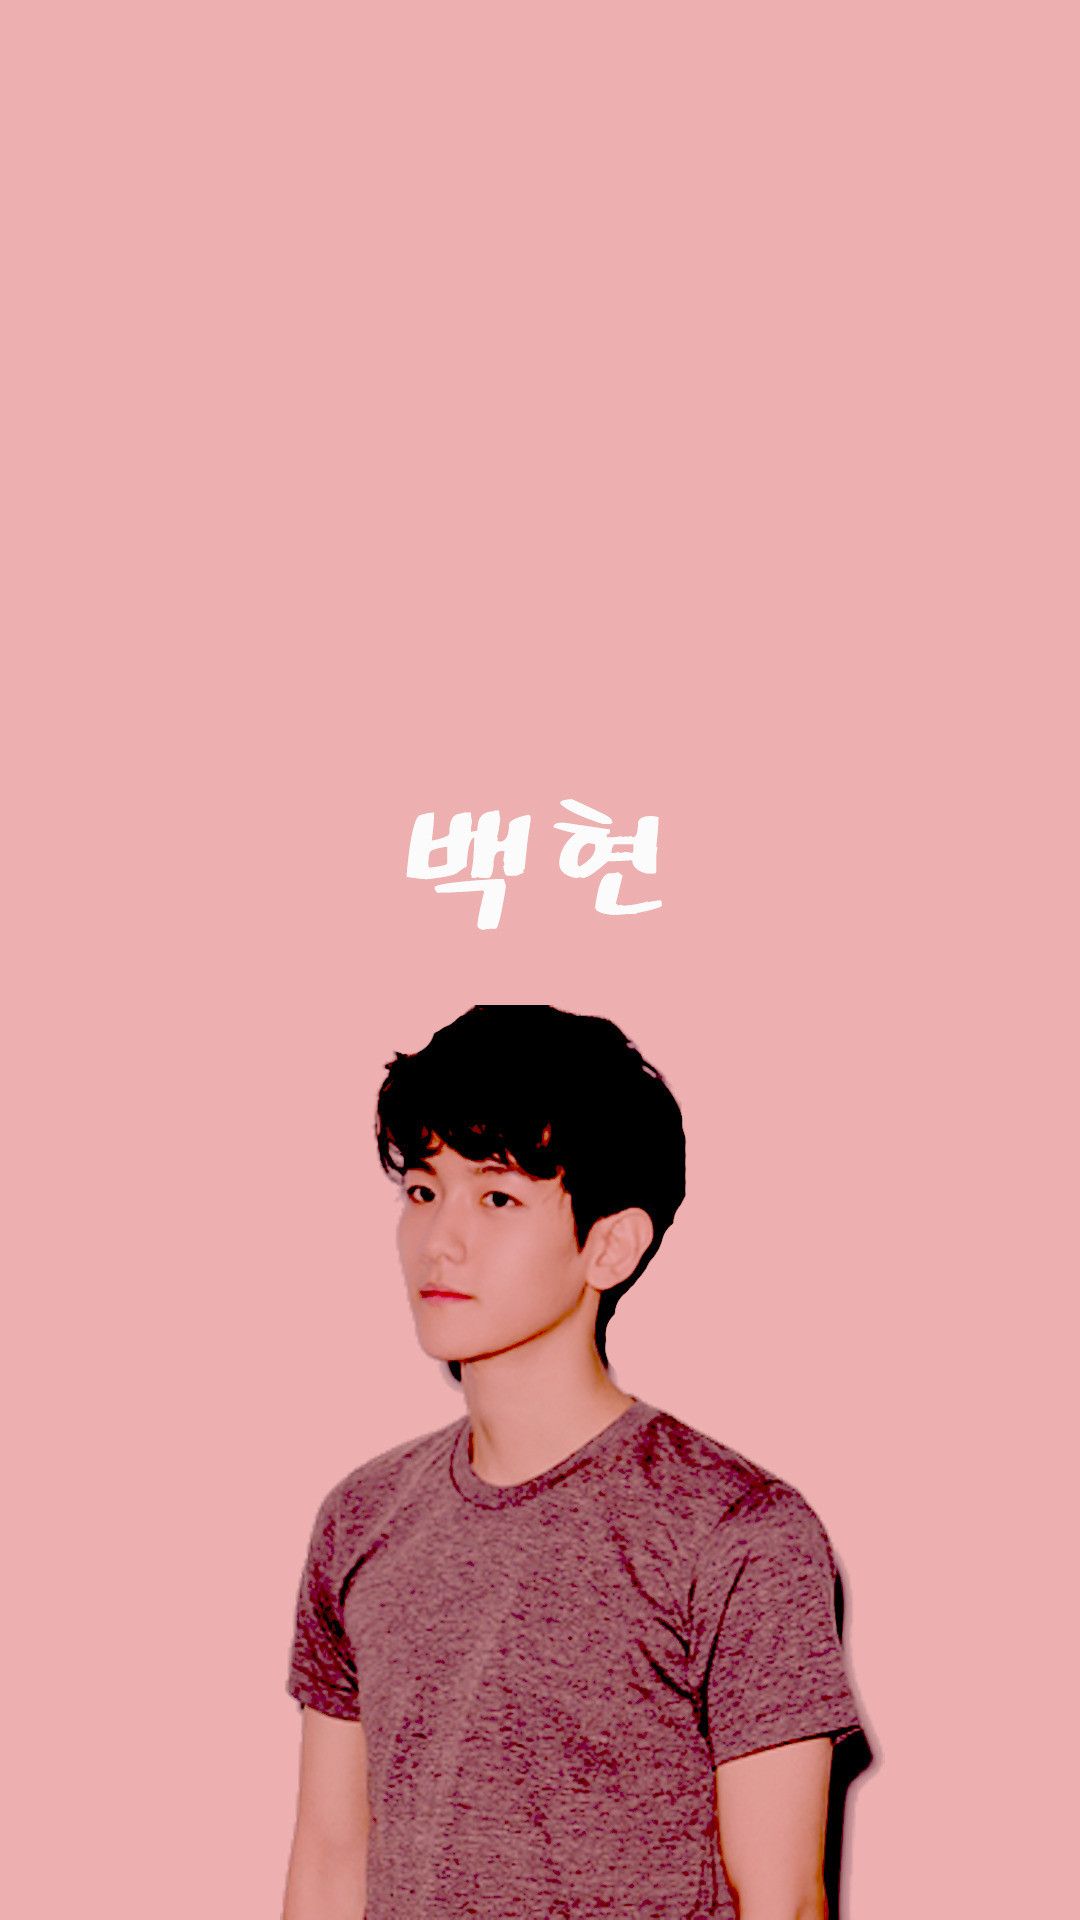 1080x1920 baekhyun iphone wallpapers requested by 2 anons :-) must be following to  save like/reblog if you save follow @hwanghaes on twitter for updates